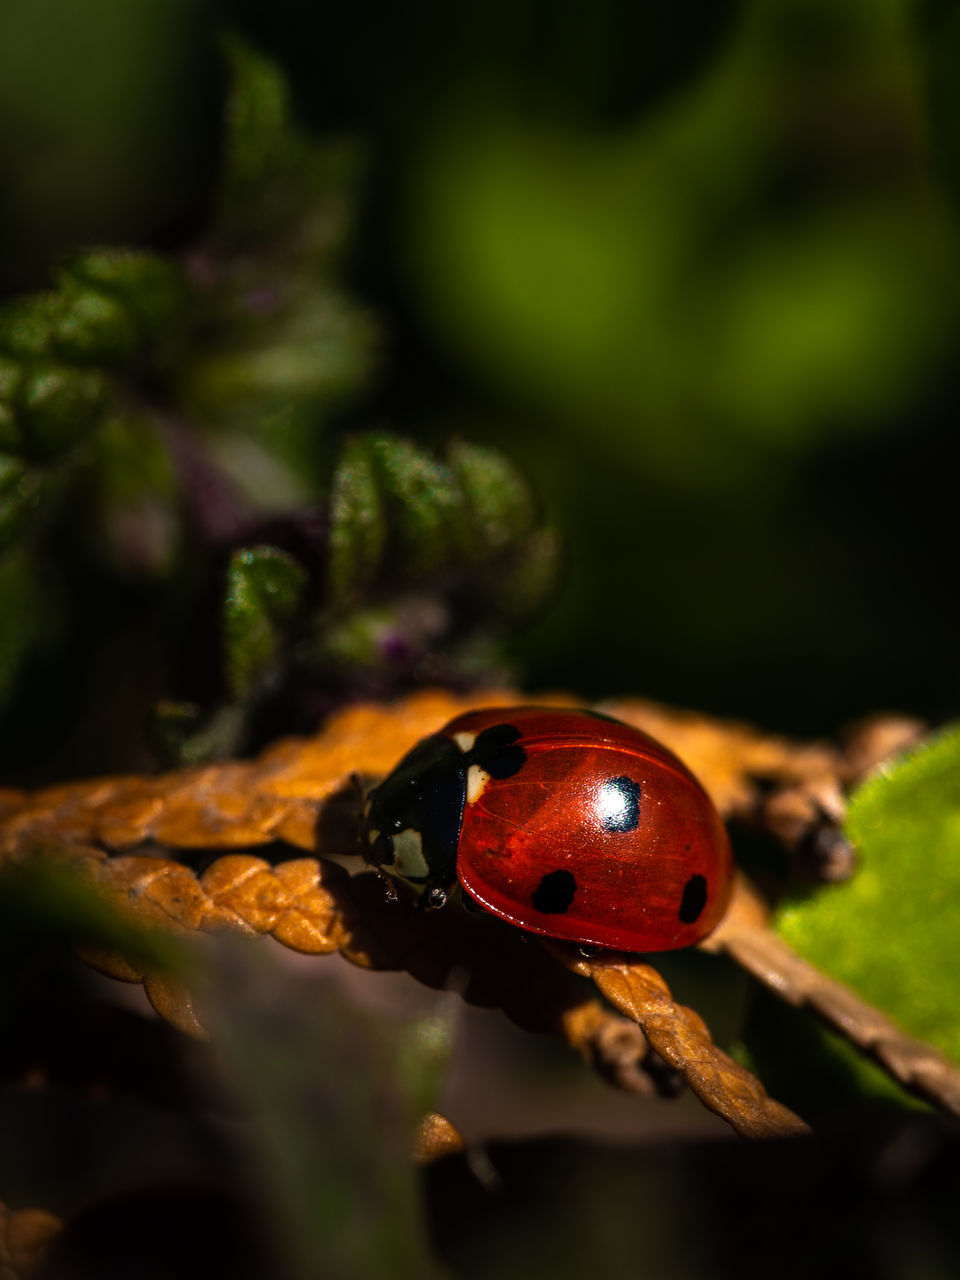 ladybug, beetle, nature, animal themes, animal, animal wildlife, macro photography, green, insect, one animal, close-up, wildlife, plant, no people, leaf, red, spotted, flower, forest, tree, outdoors, focus on foreground, plant part, beauty in nature, day, selective focus